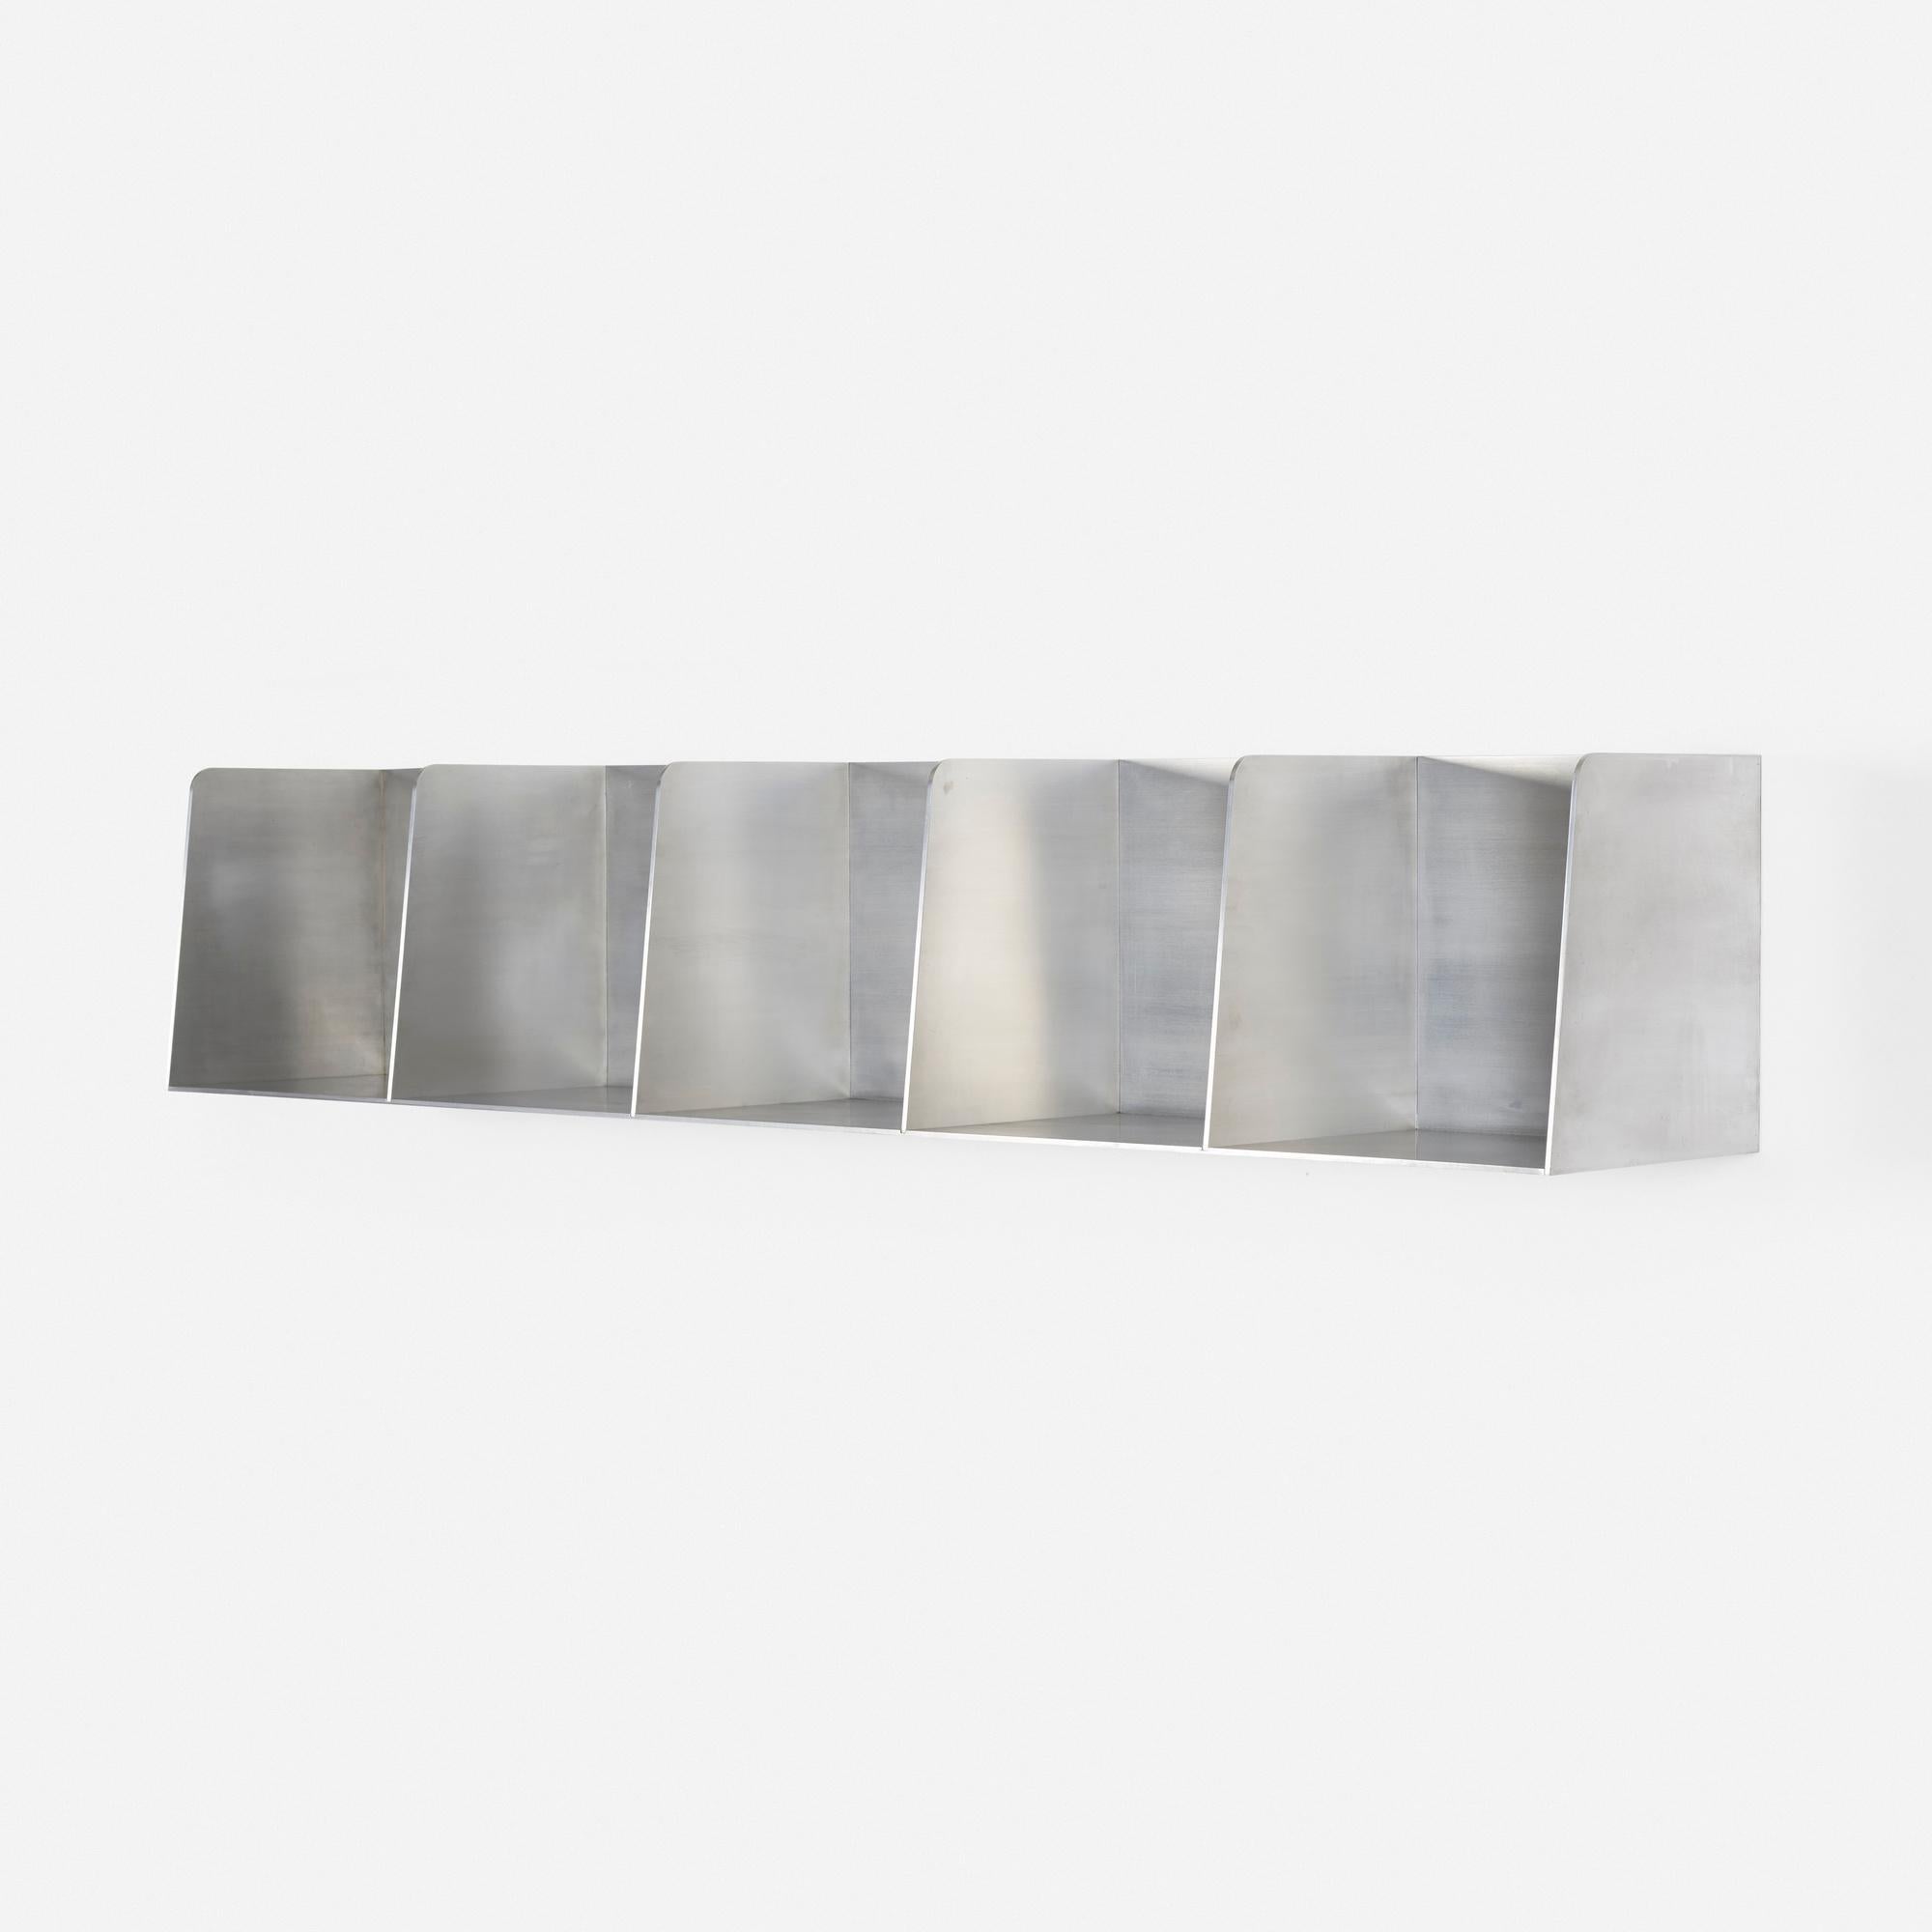 Minimalist Library Bookcase Shelf in Brushed and Waxed Aluminum Plate by Jonathan Nesci